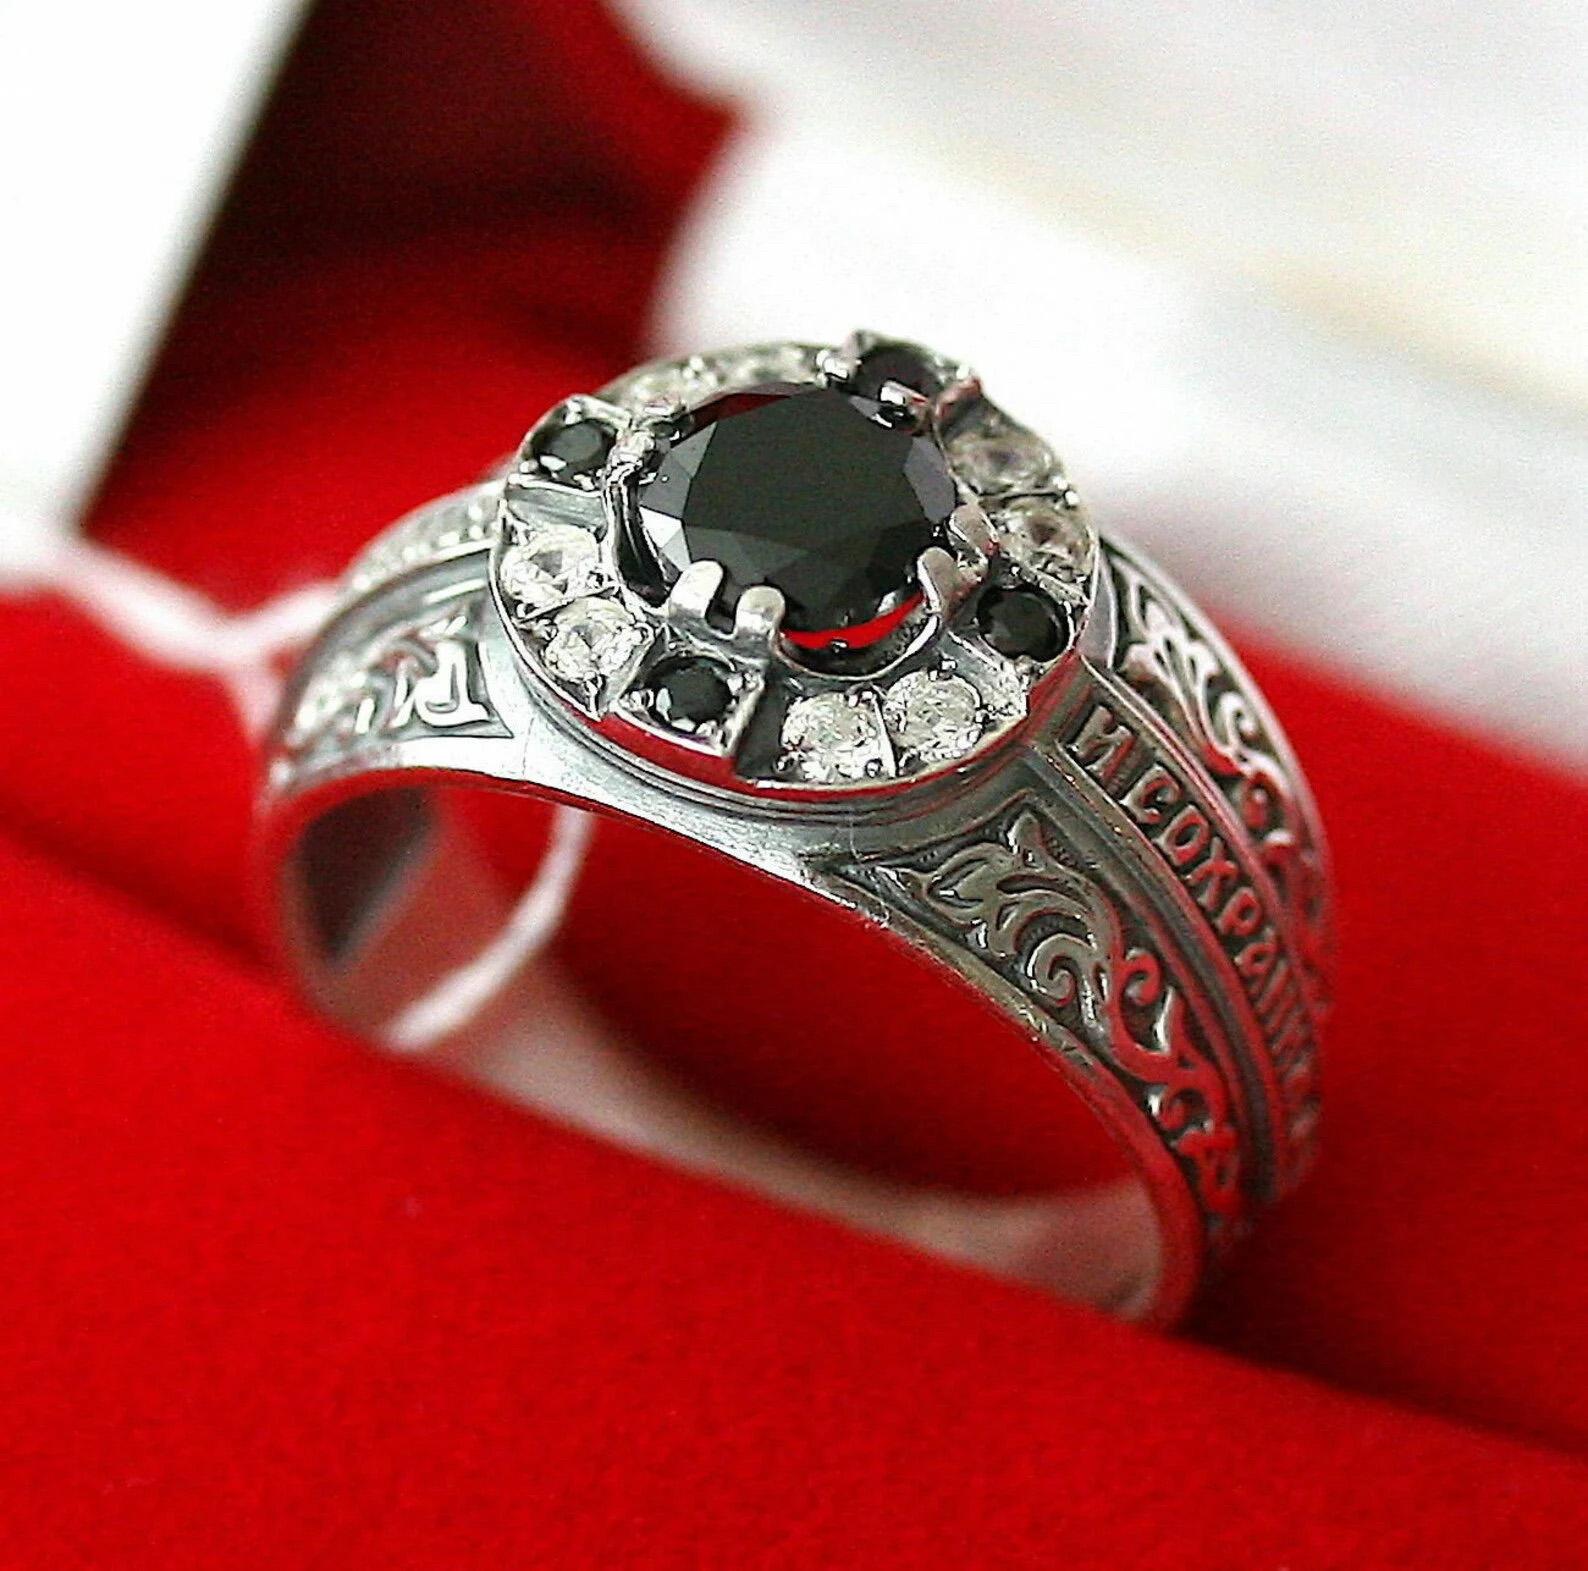 Men Russian Orthodox ring prayer protective ring.Save and Protect. Priest ring. Gem Stones. New. B500|Men Russian Orthodox ring prayer protective ring.Save and Protect. Priest ring. Gem Stones. New. B500|Men Russian Orthodox ring prayer protective ring.Save and Protect. Priest ring. Gem Stones. New. B500